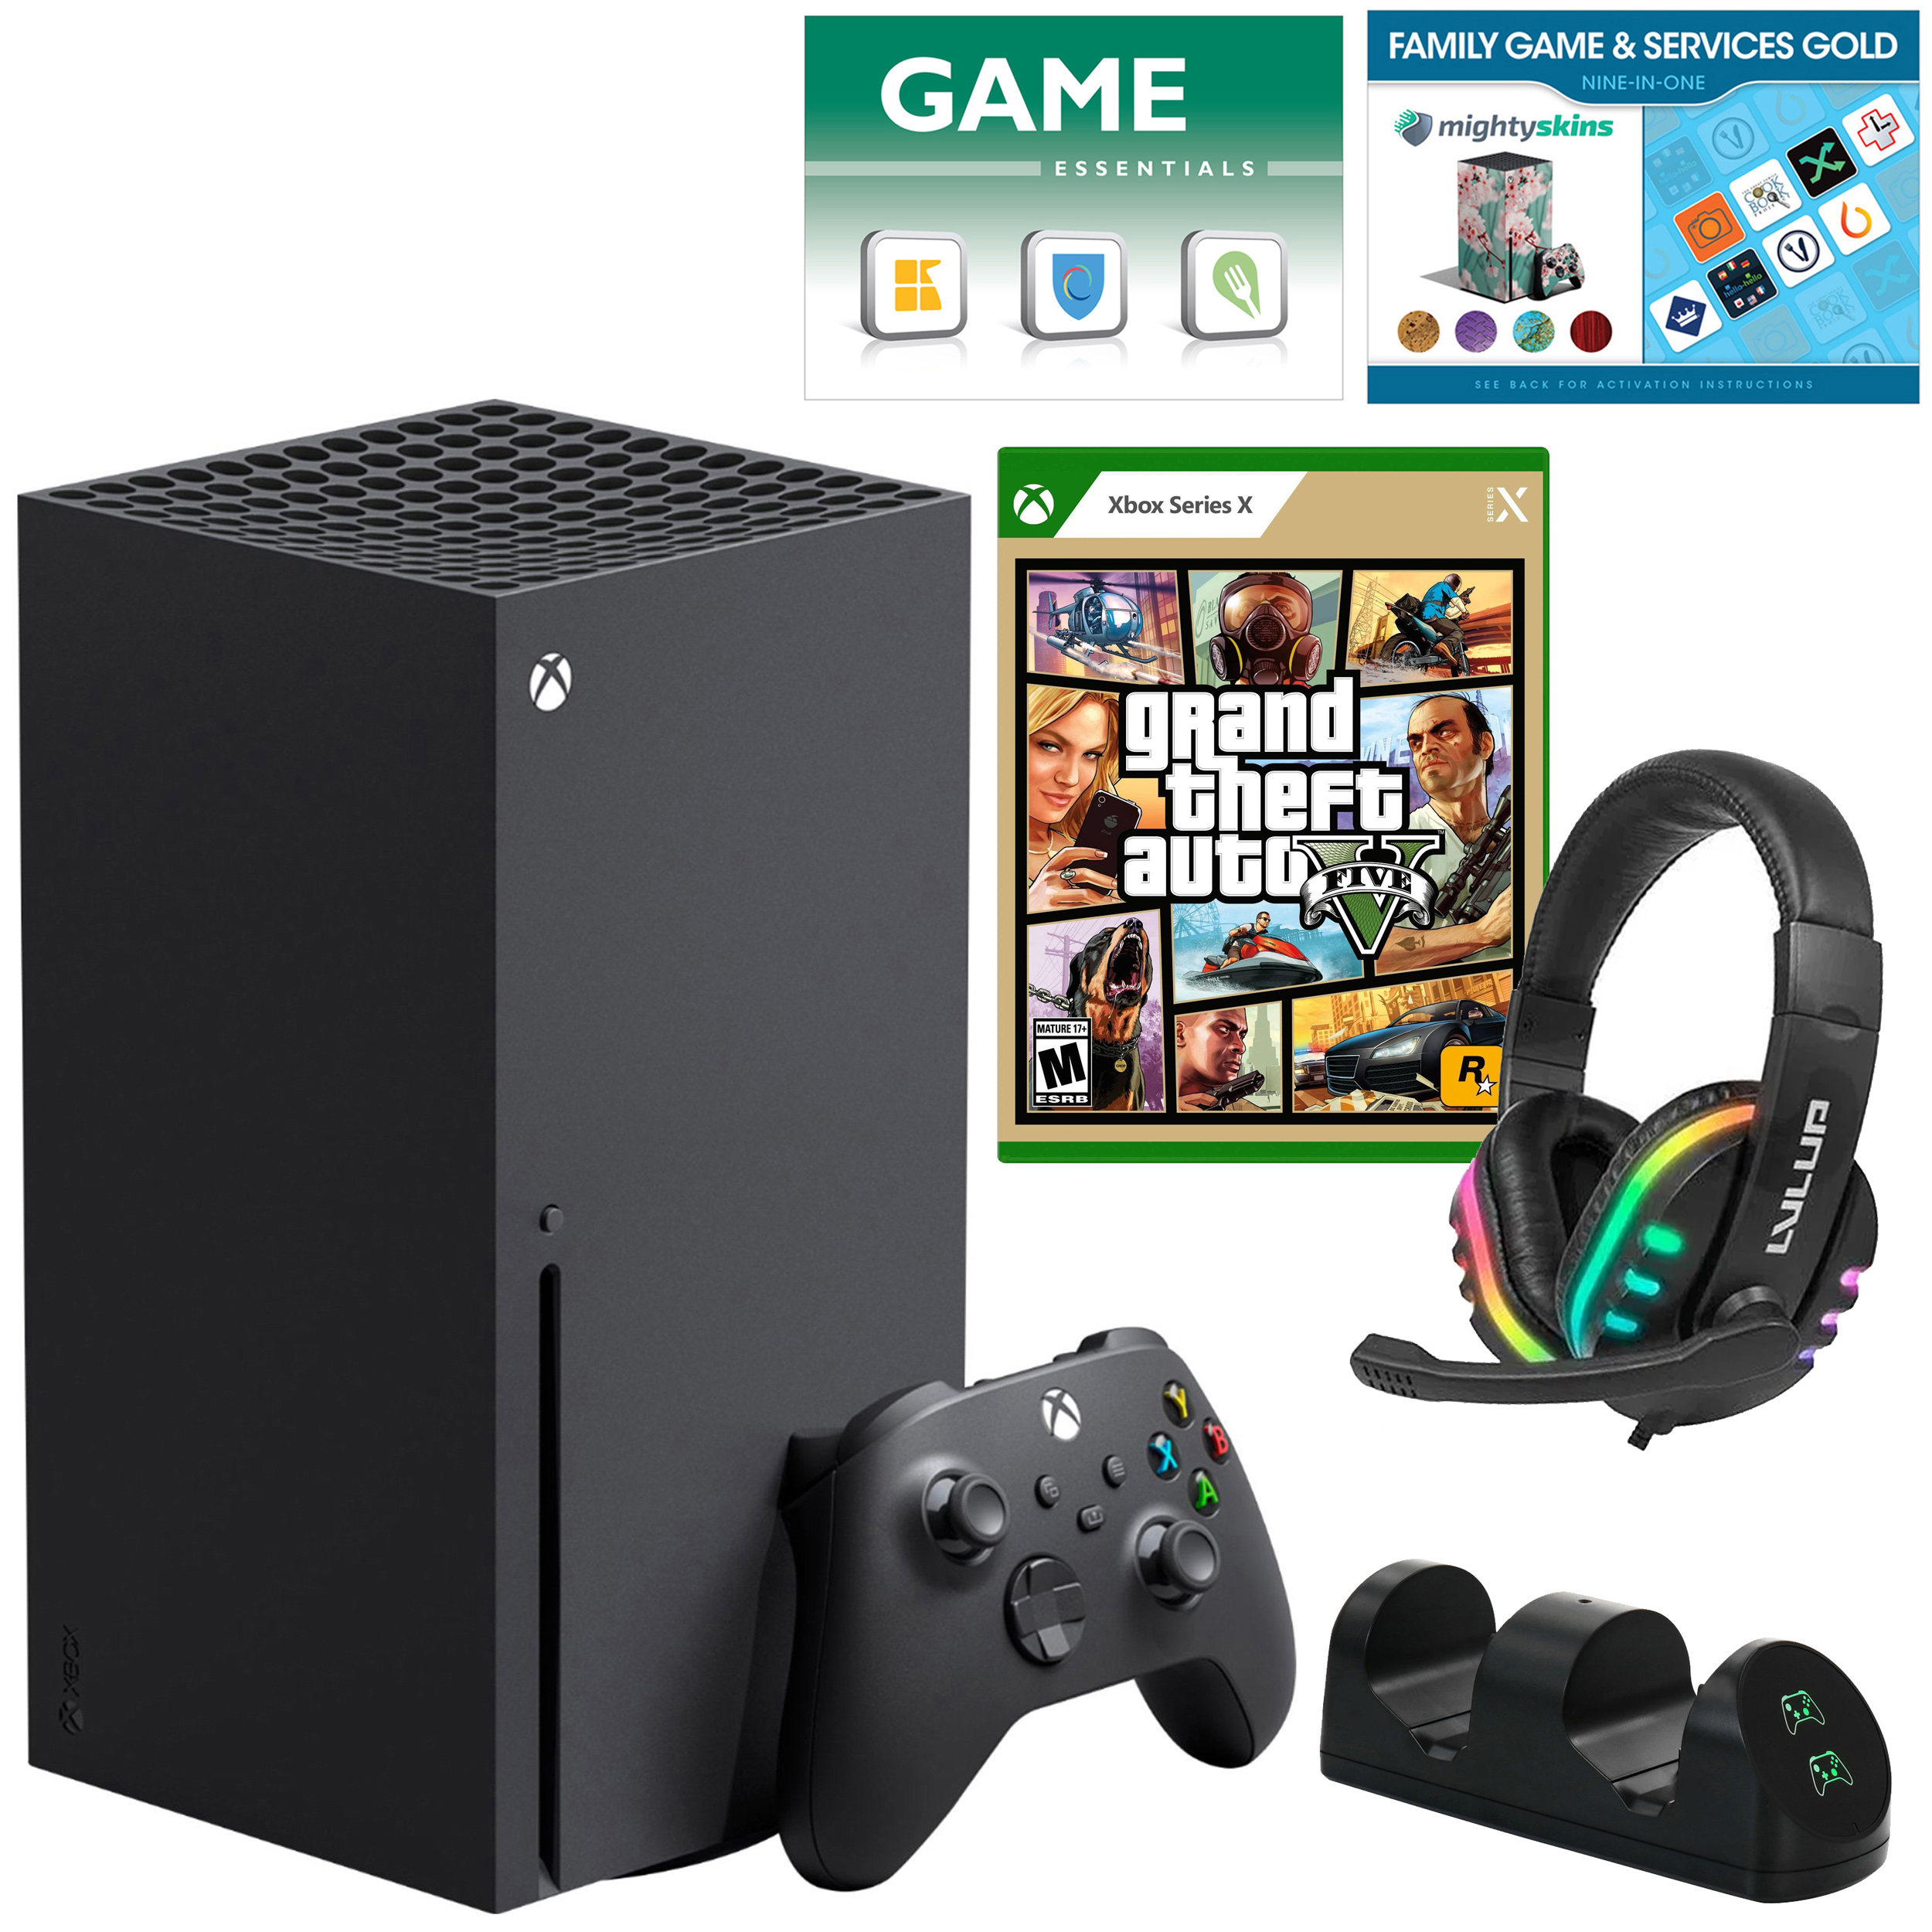 Microsoft Xbox Series X Console with Accessories and 2 Vouchers